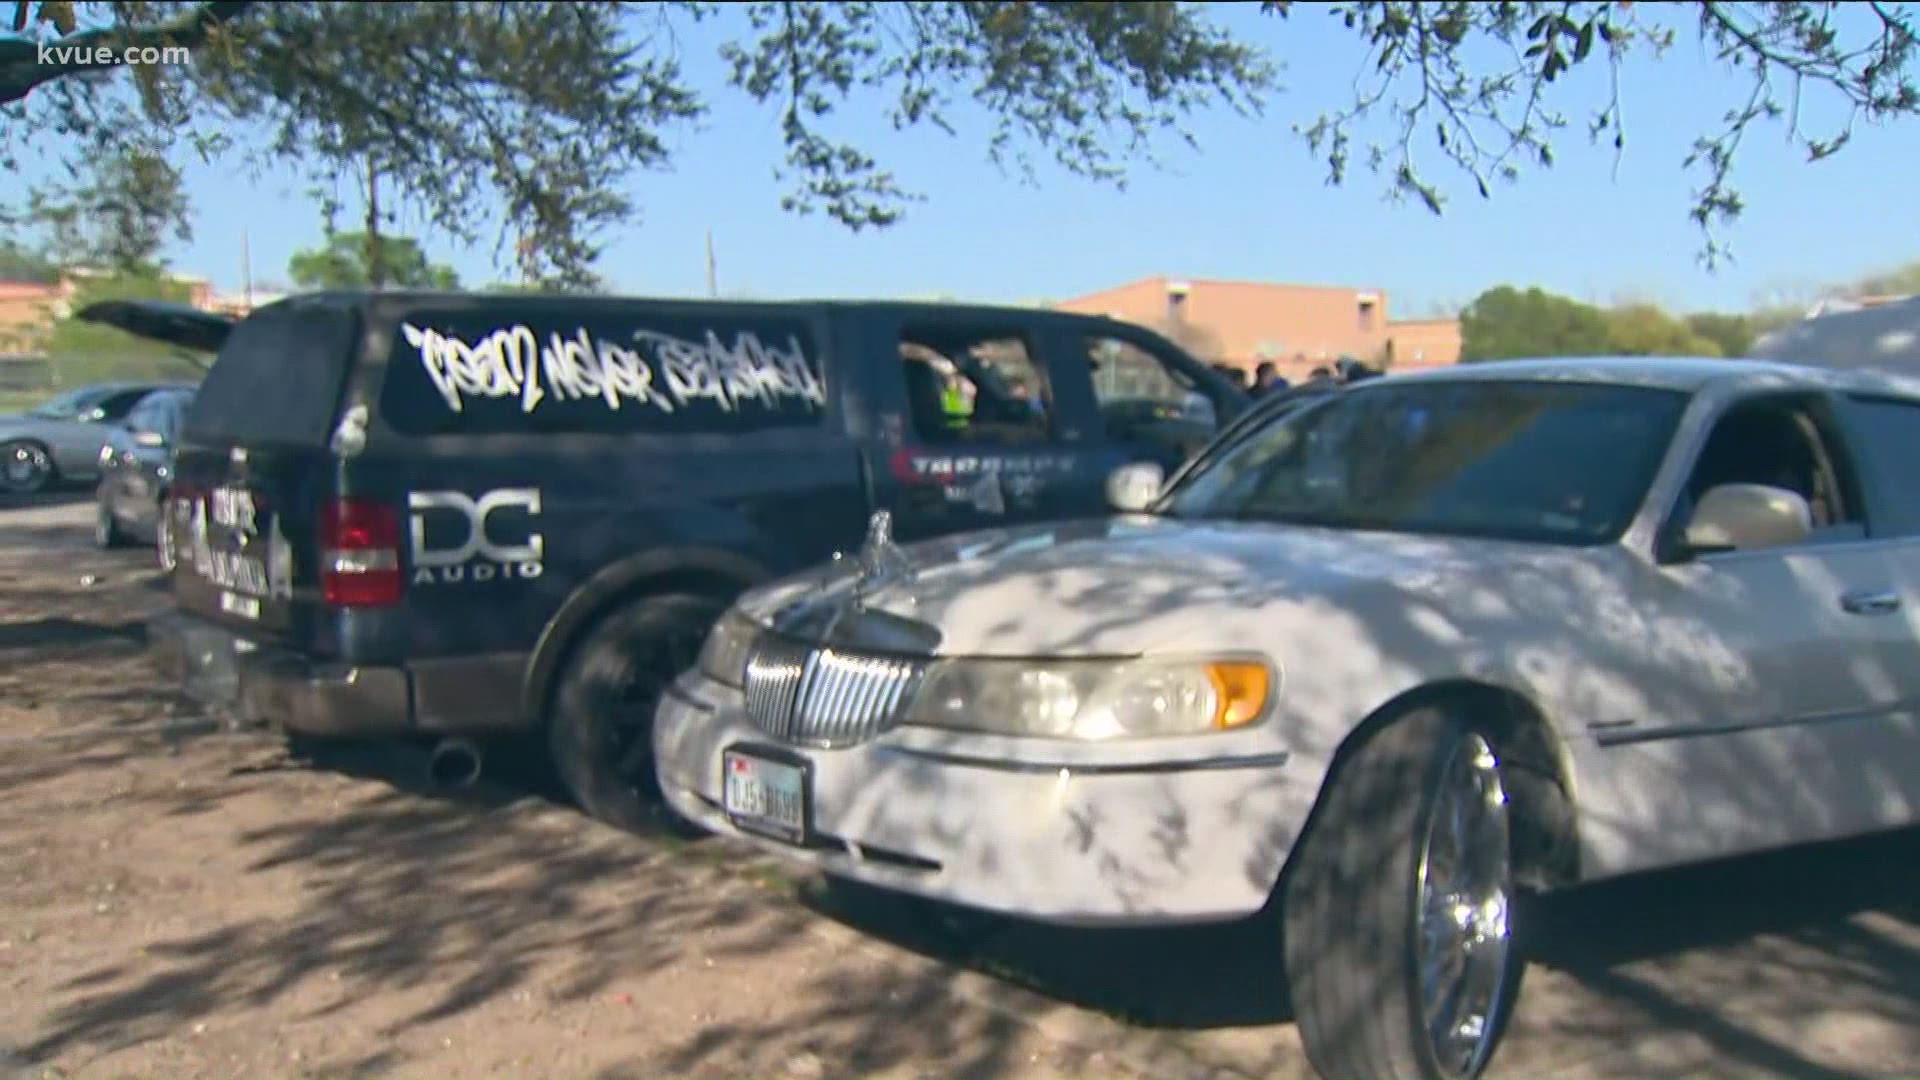 Residents at The Weaver have called the police trying to stop weekly car club meet ups at "Chicano Park."